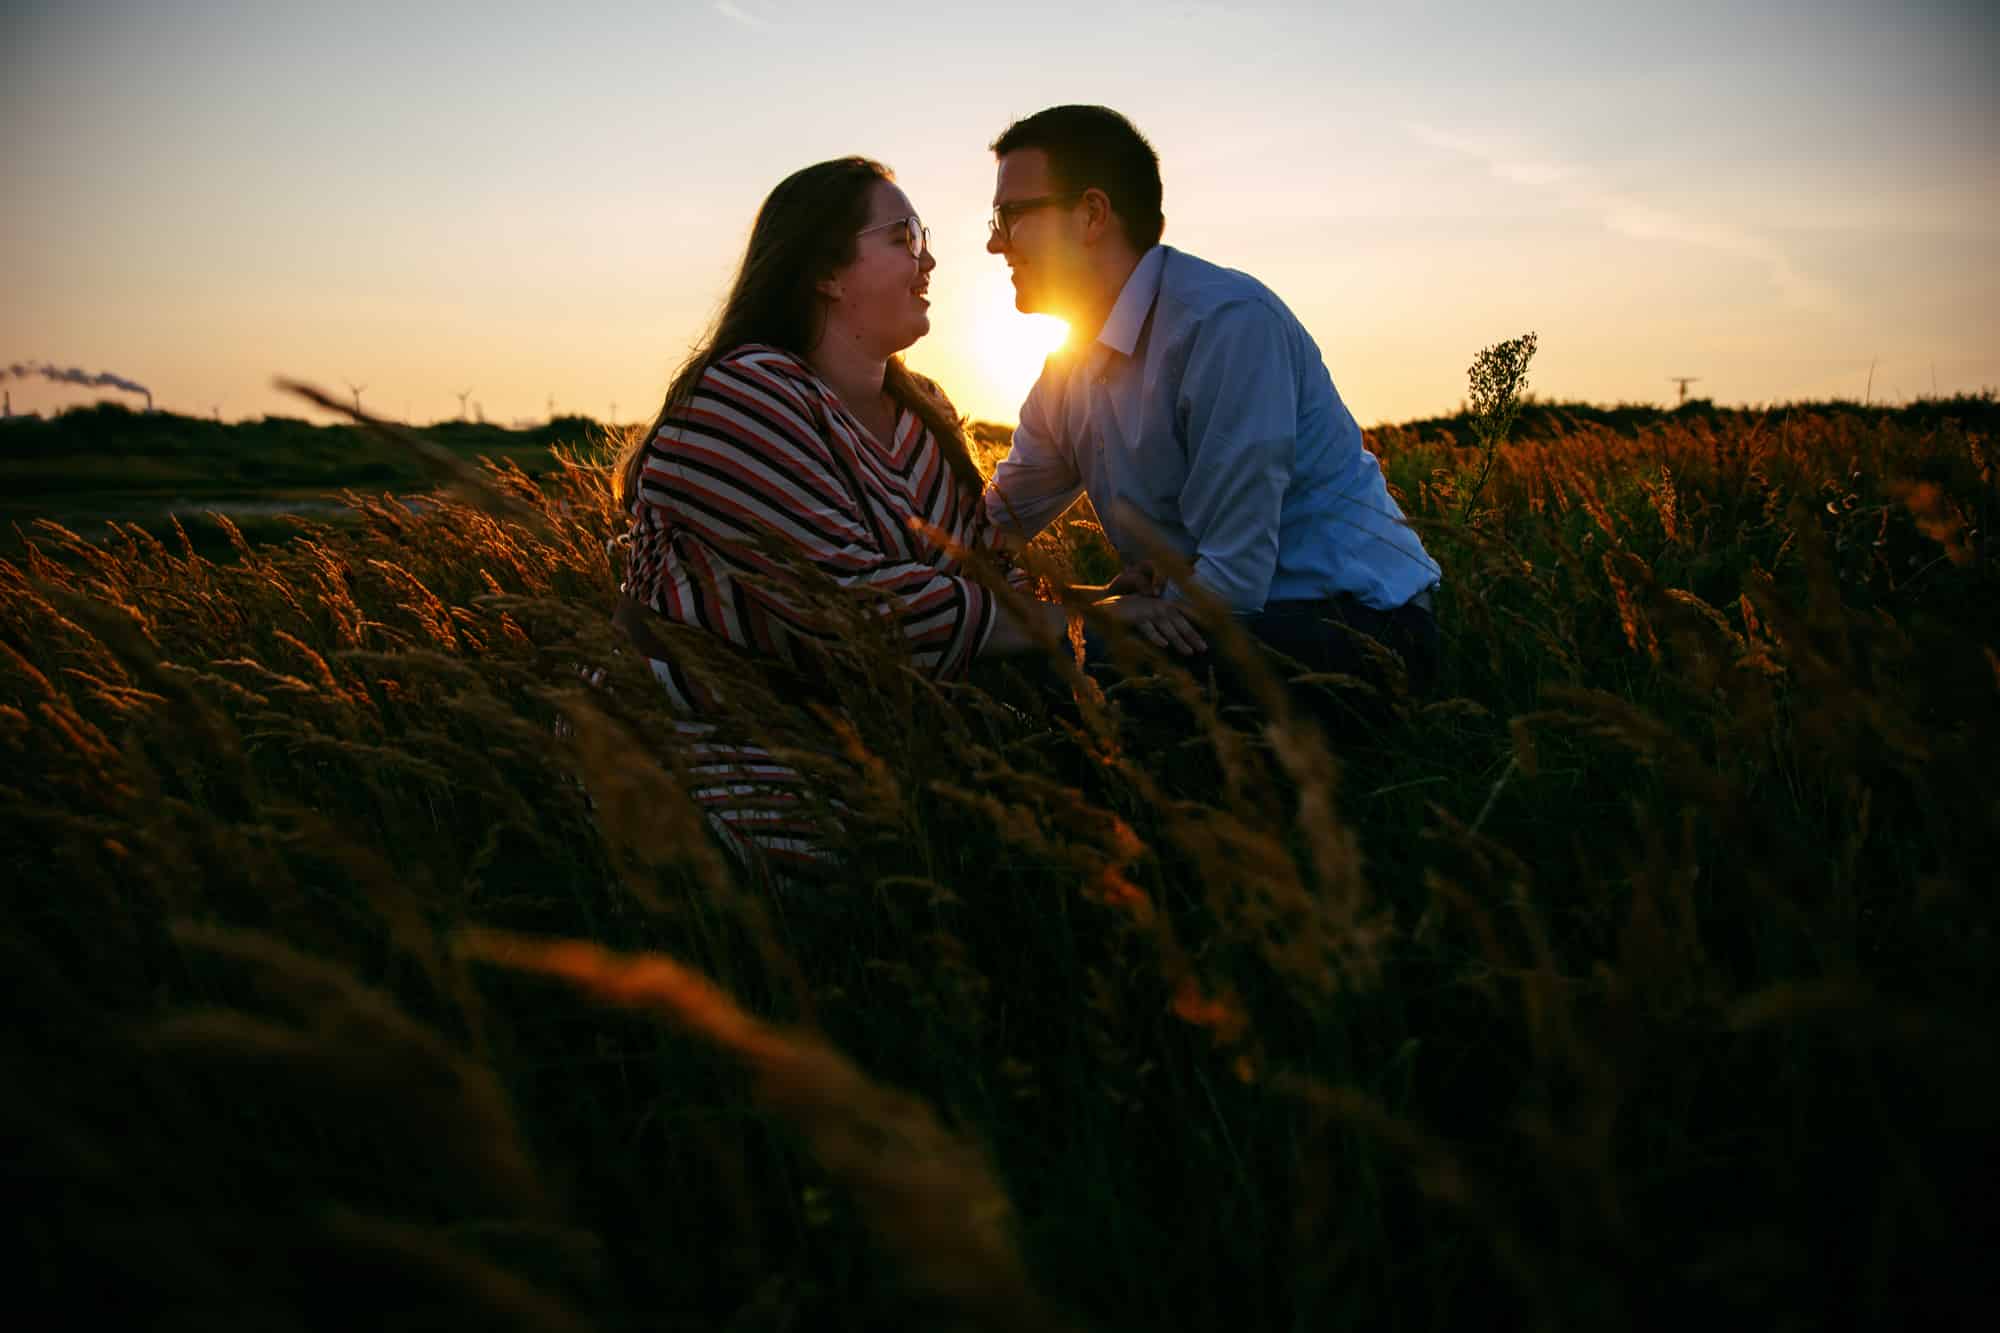 Loveshoot: a couple kissing passionately in a field at sunset.